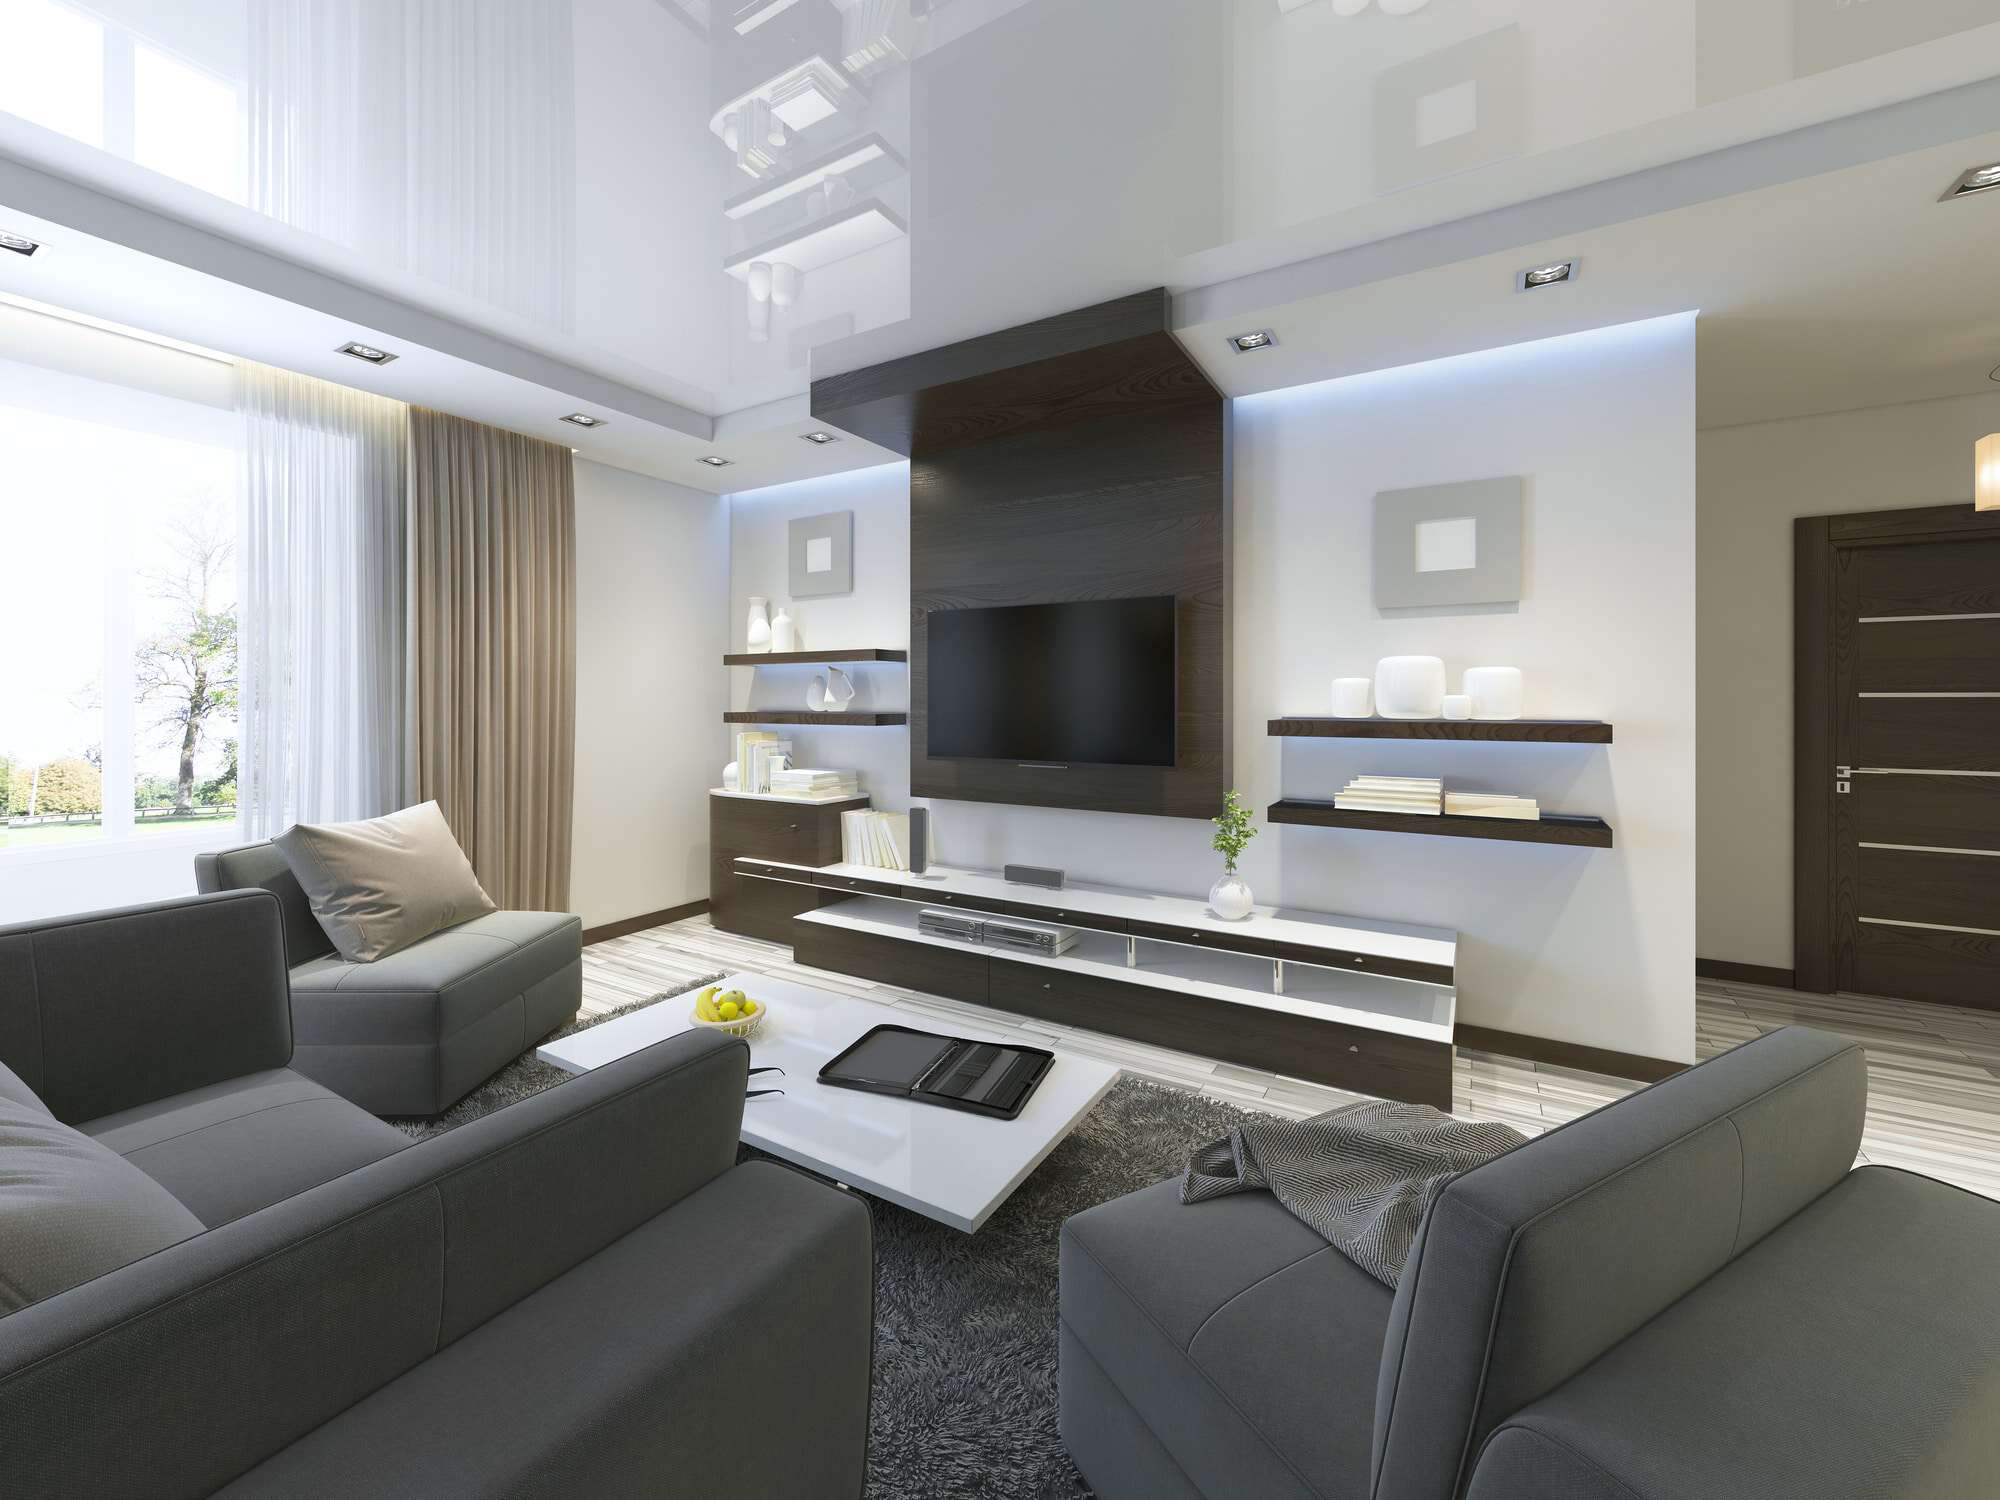 Audio system with TV and shelves in the living room Contemporary